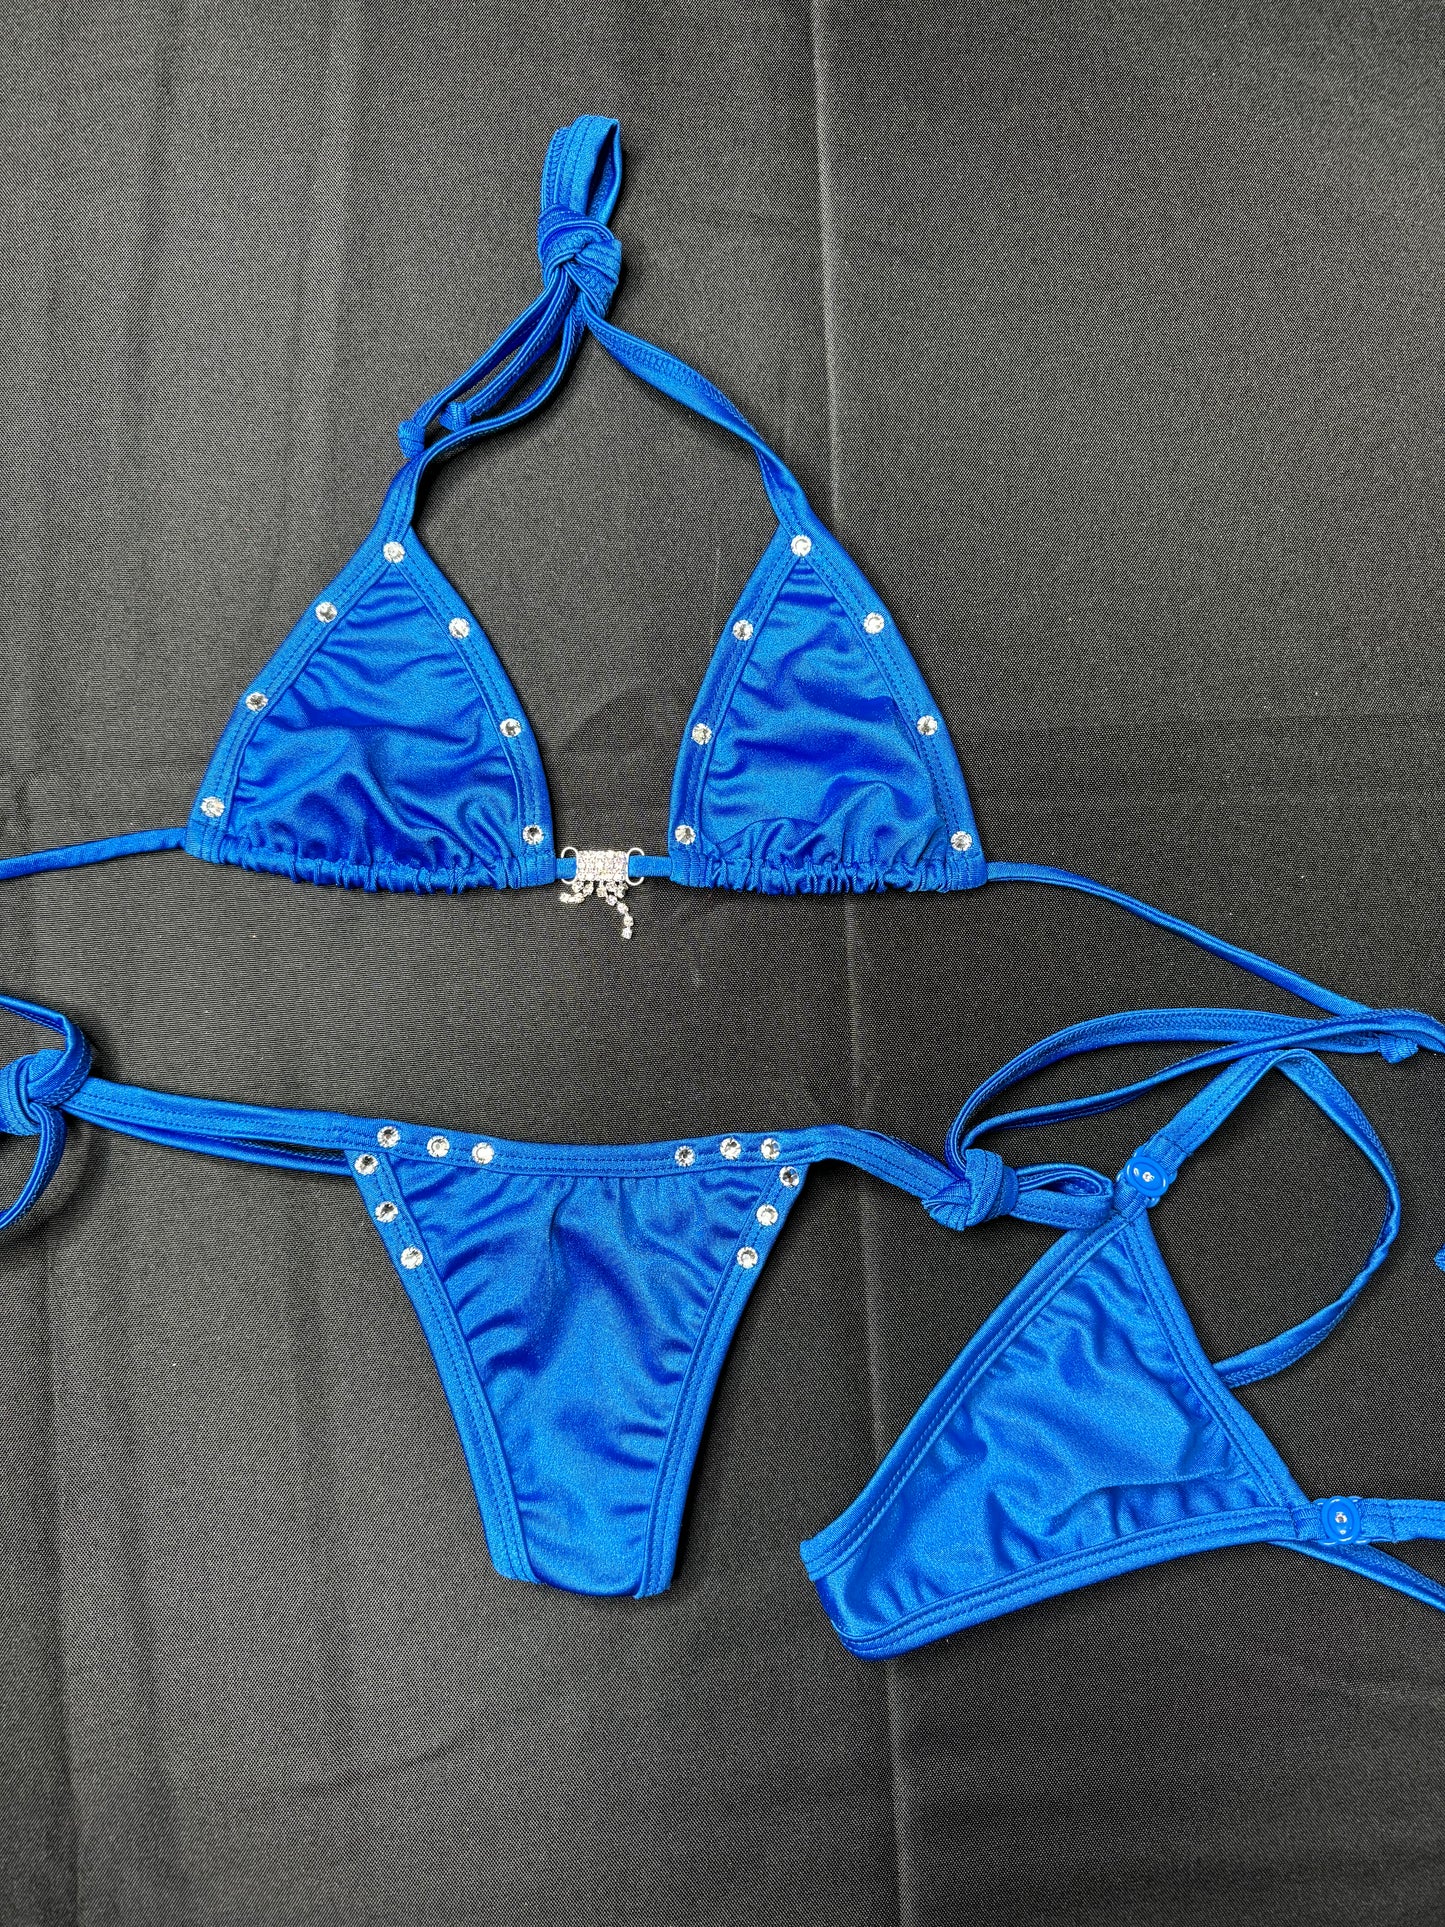 Exotic Dancer Side-Tie Bikini Two-Piece Outfit